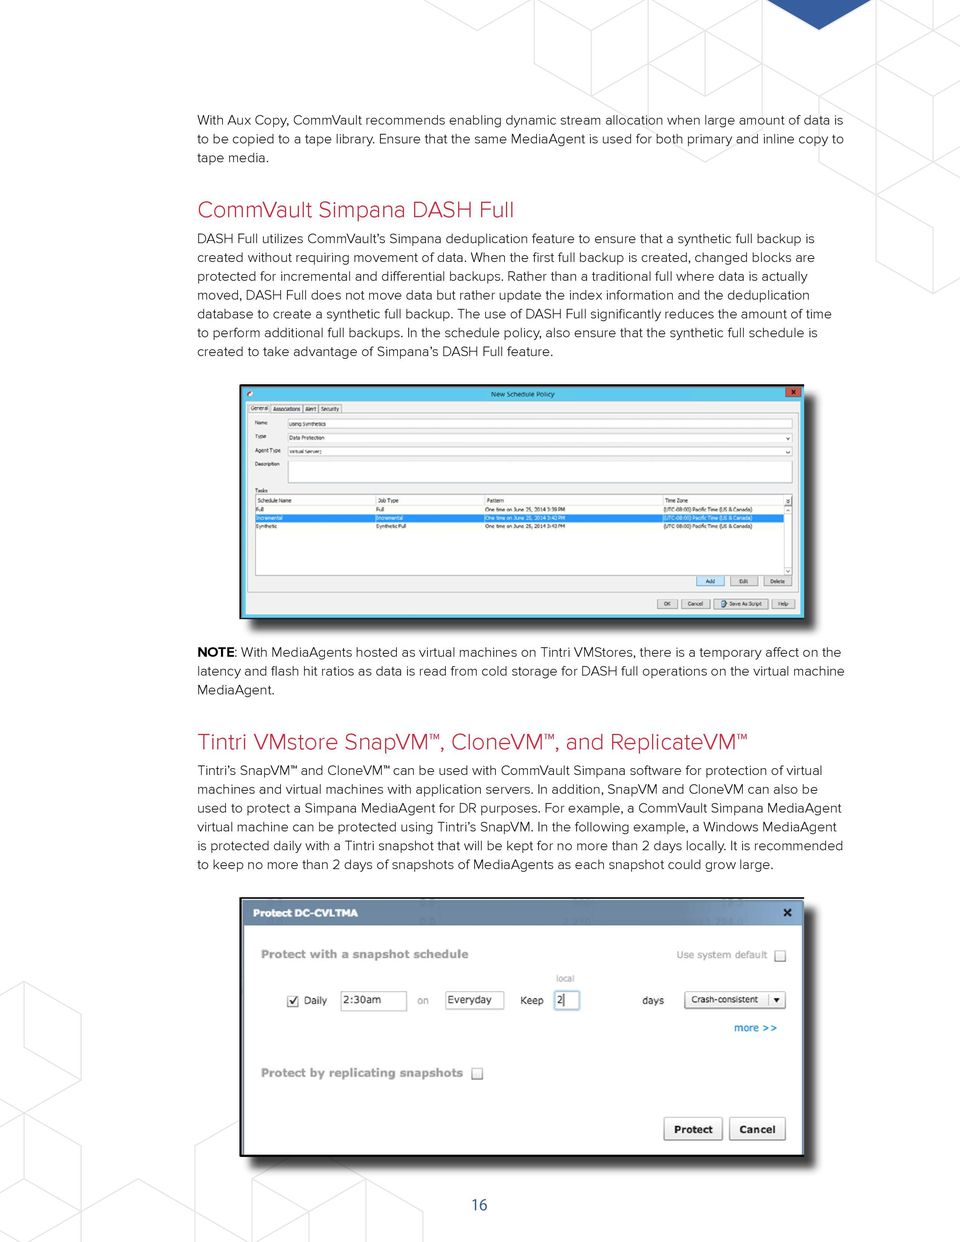 CommVault Simpana DASH Full DASH Full utilizes CommVault s Simpana deduplication feature to ensure that a synthetic full backup is created without requiring movement of data.